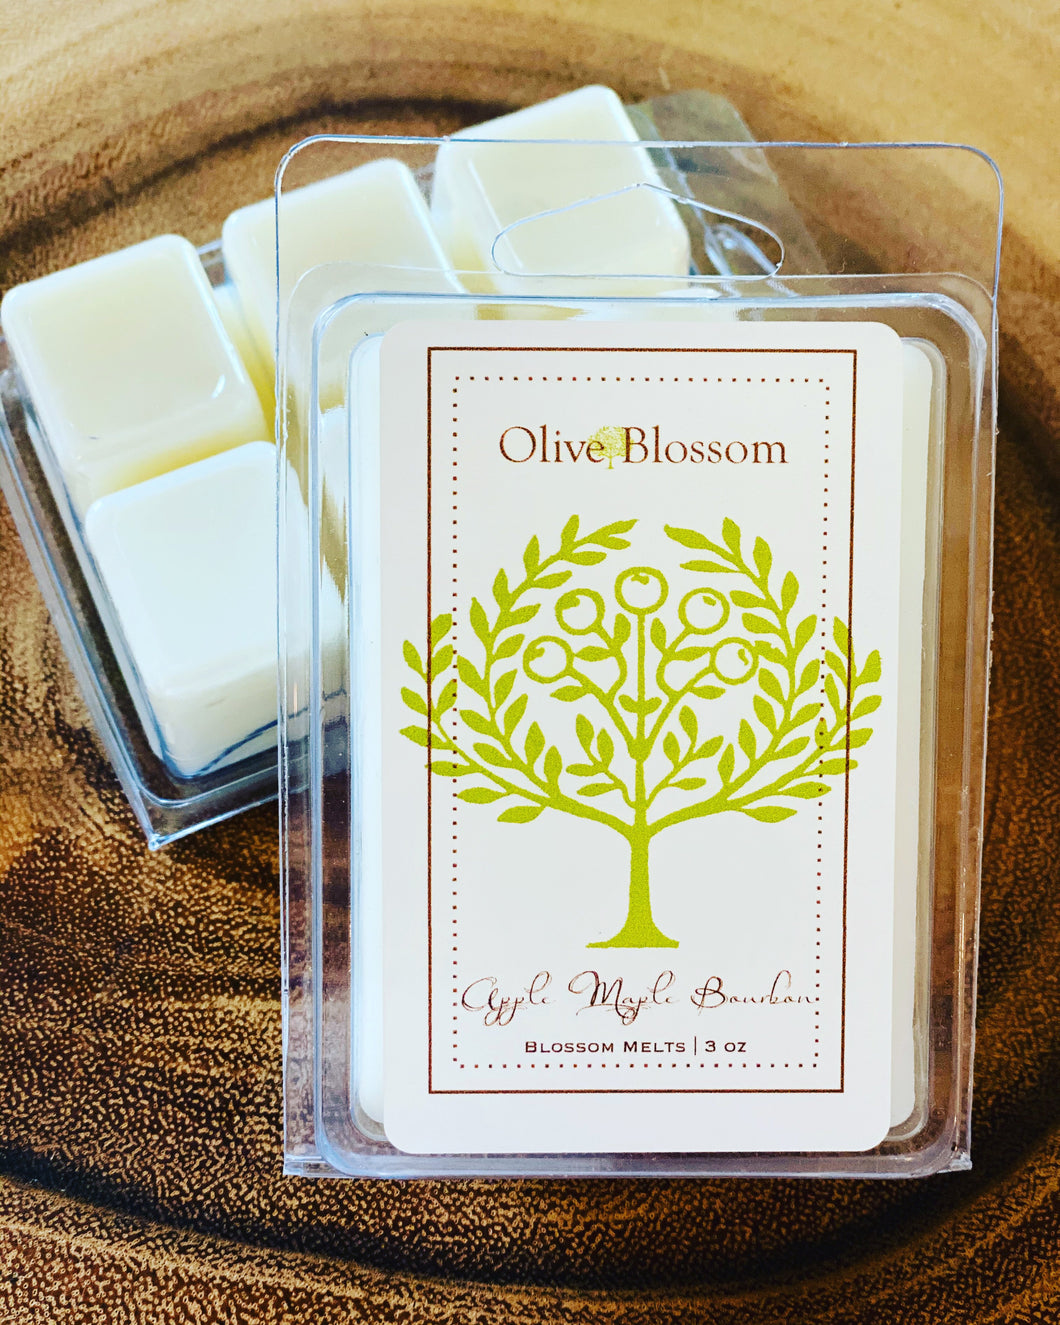 SLIGHTLY IMPERFECT| BLOSSOM MELTS 50% off